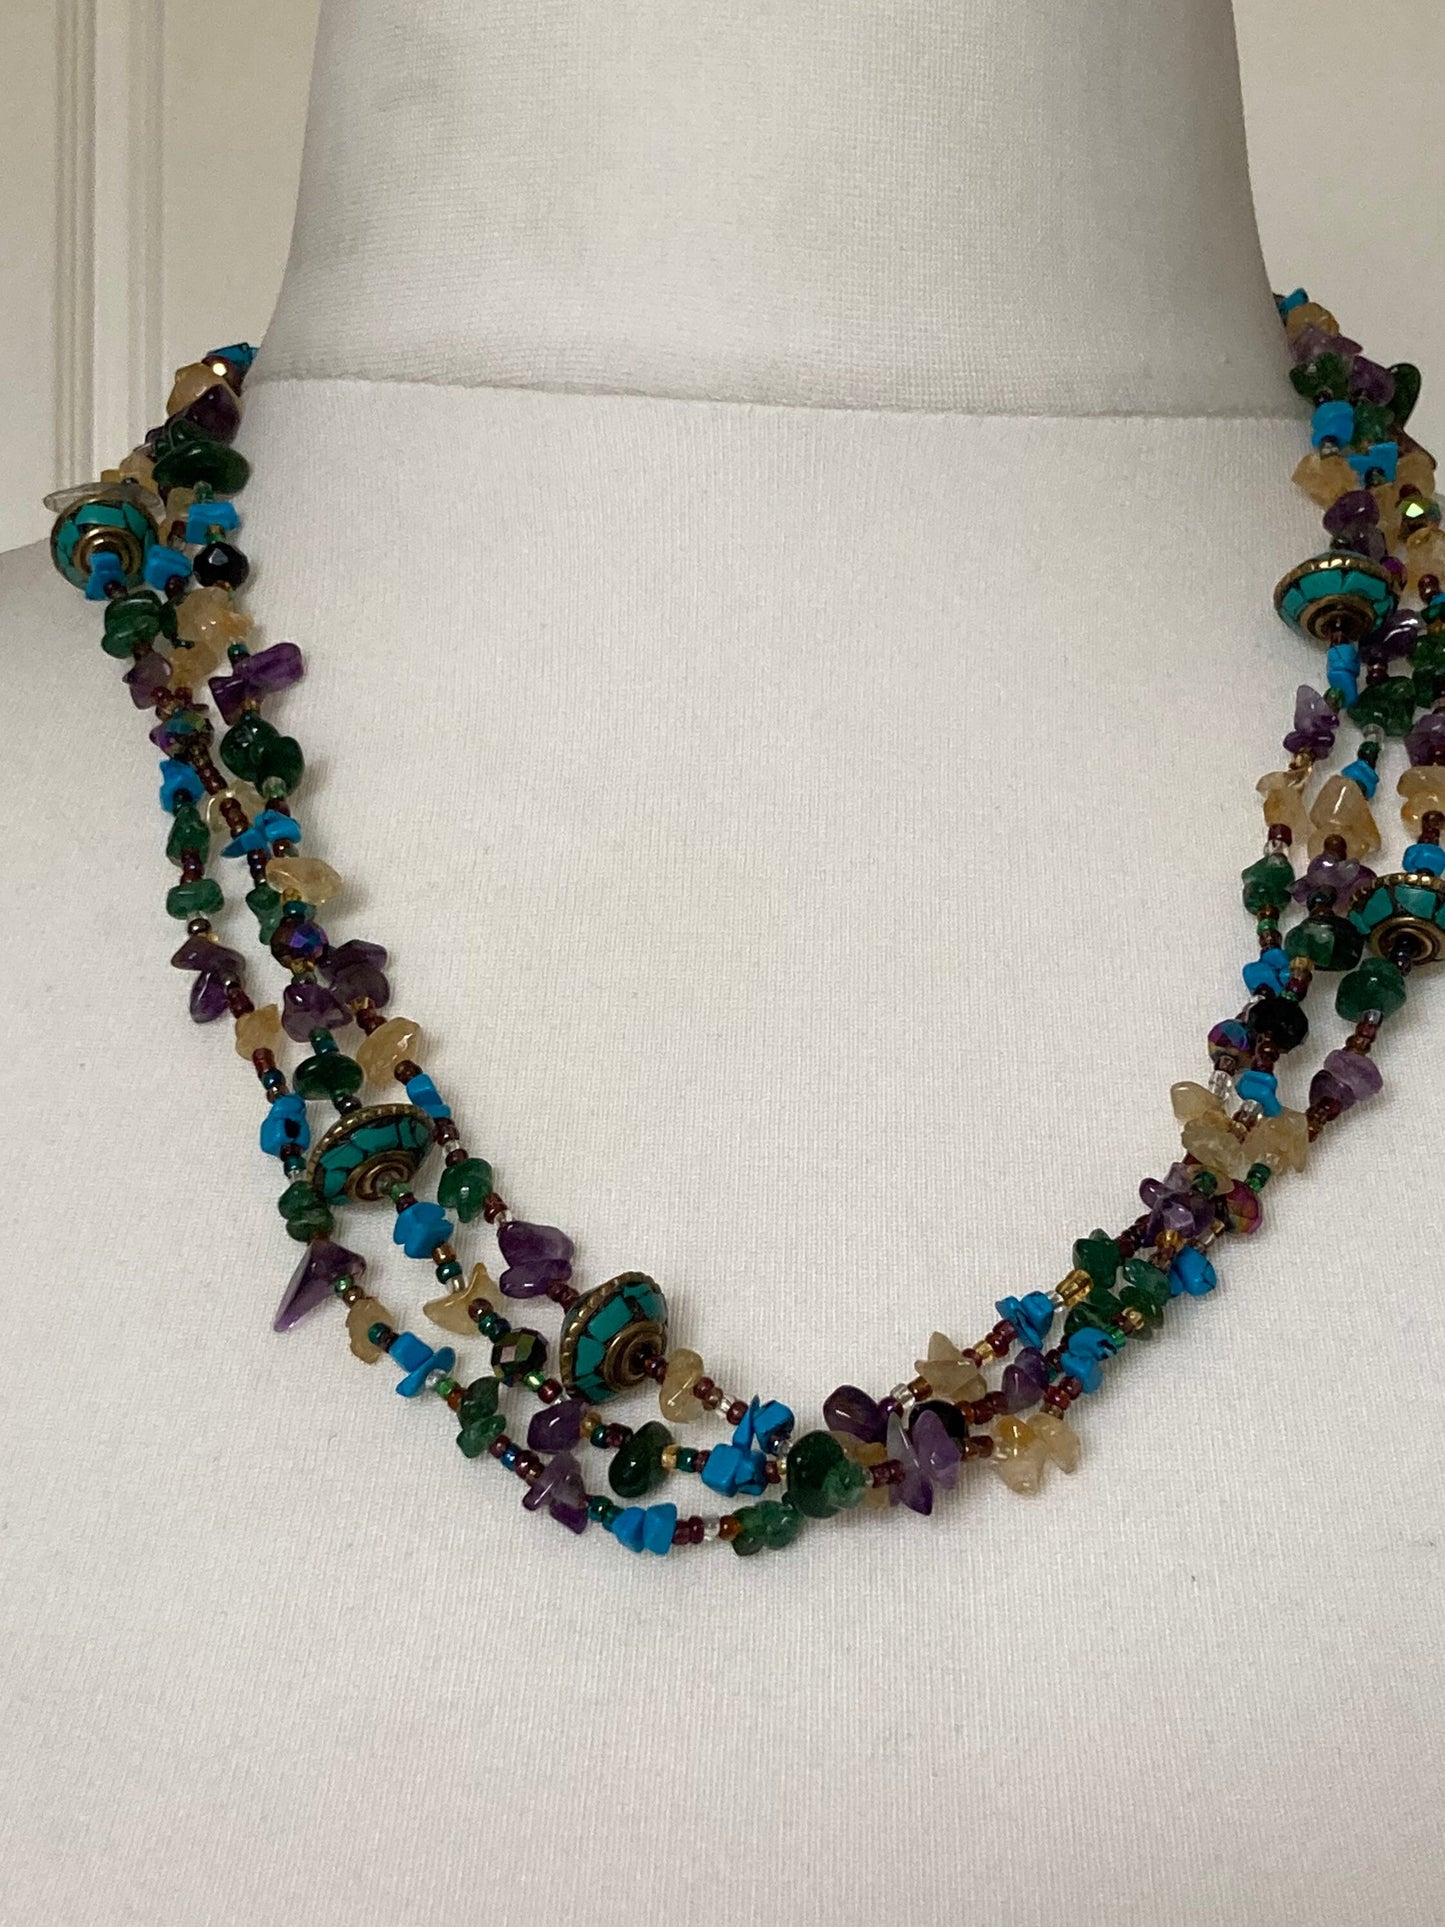 Eastern beaded necklace with turquoise cream amethyst gemstones